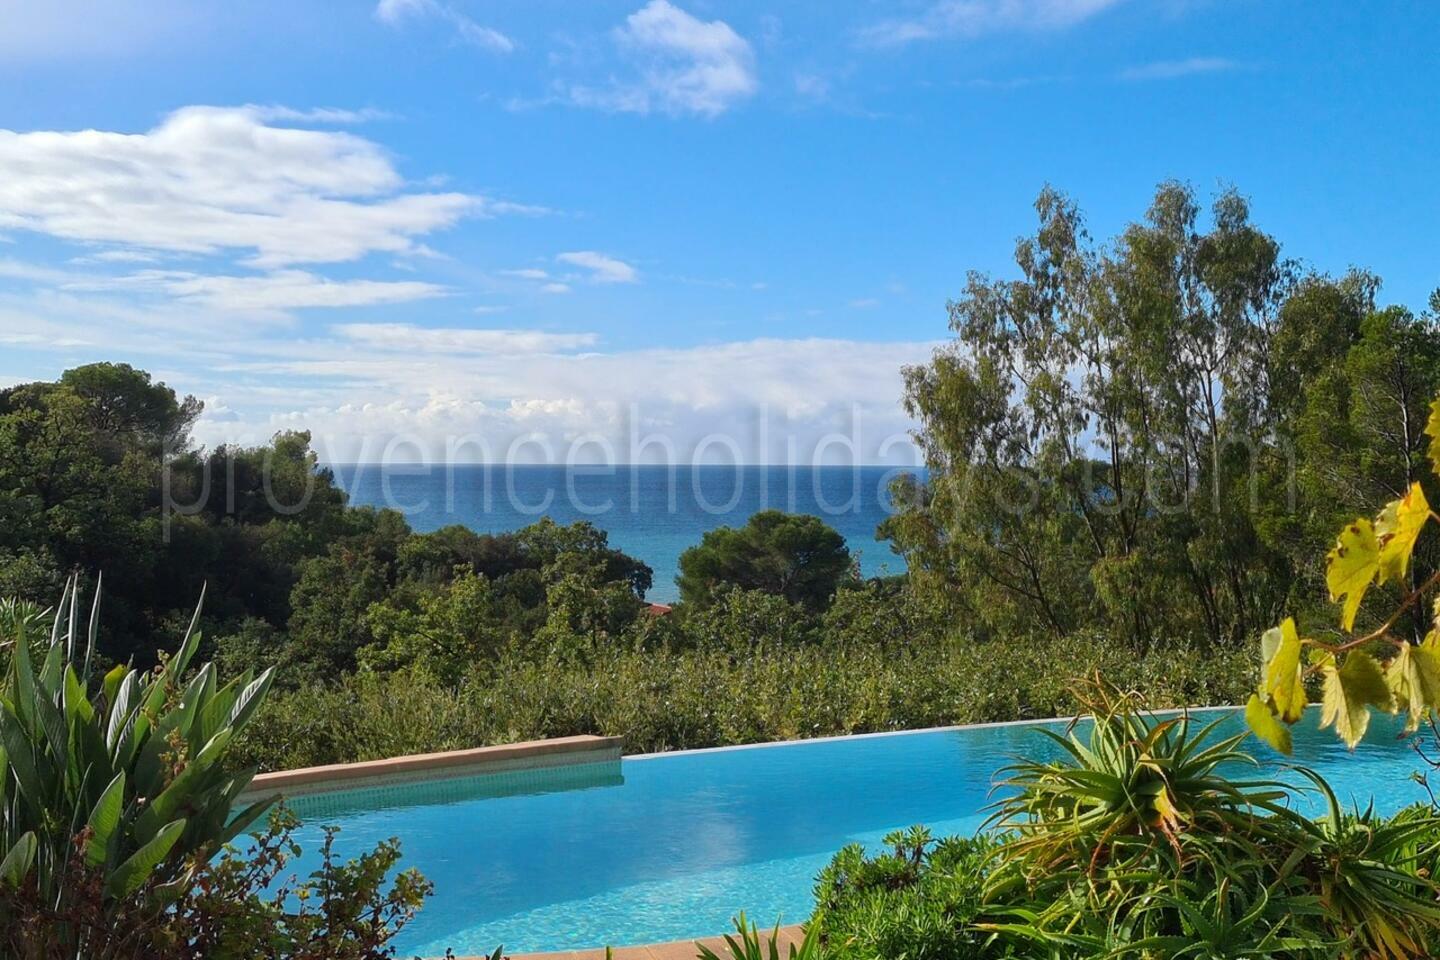 Charming Holiday Home with a Sea View, an Infinity Pool, and Access to the Beach 1 - Villa Cassiopée: Villa: Pool